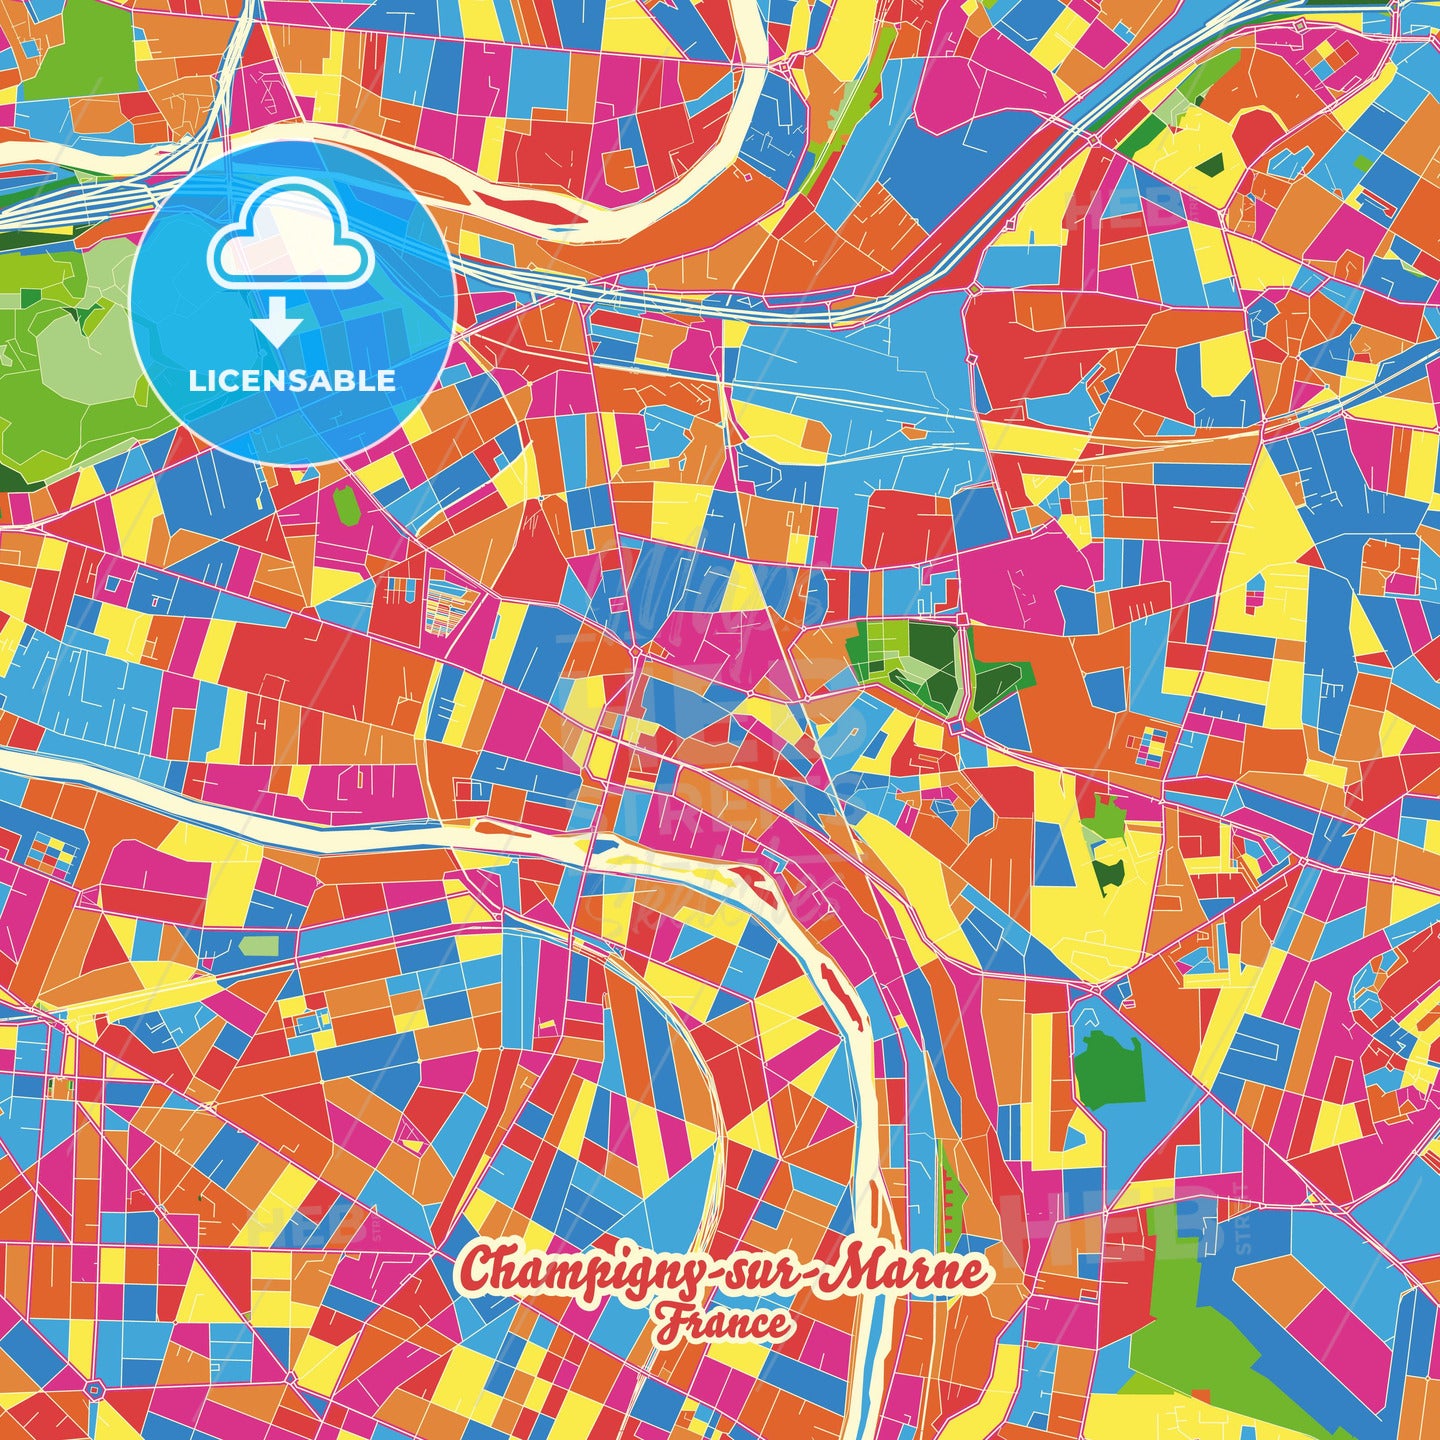 Champigny-sur-Marne, France Crazy Colorful Street Map Poster Template - HEBSTREITS Sketches